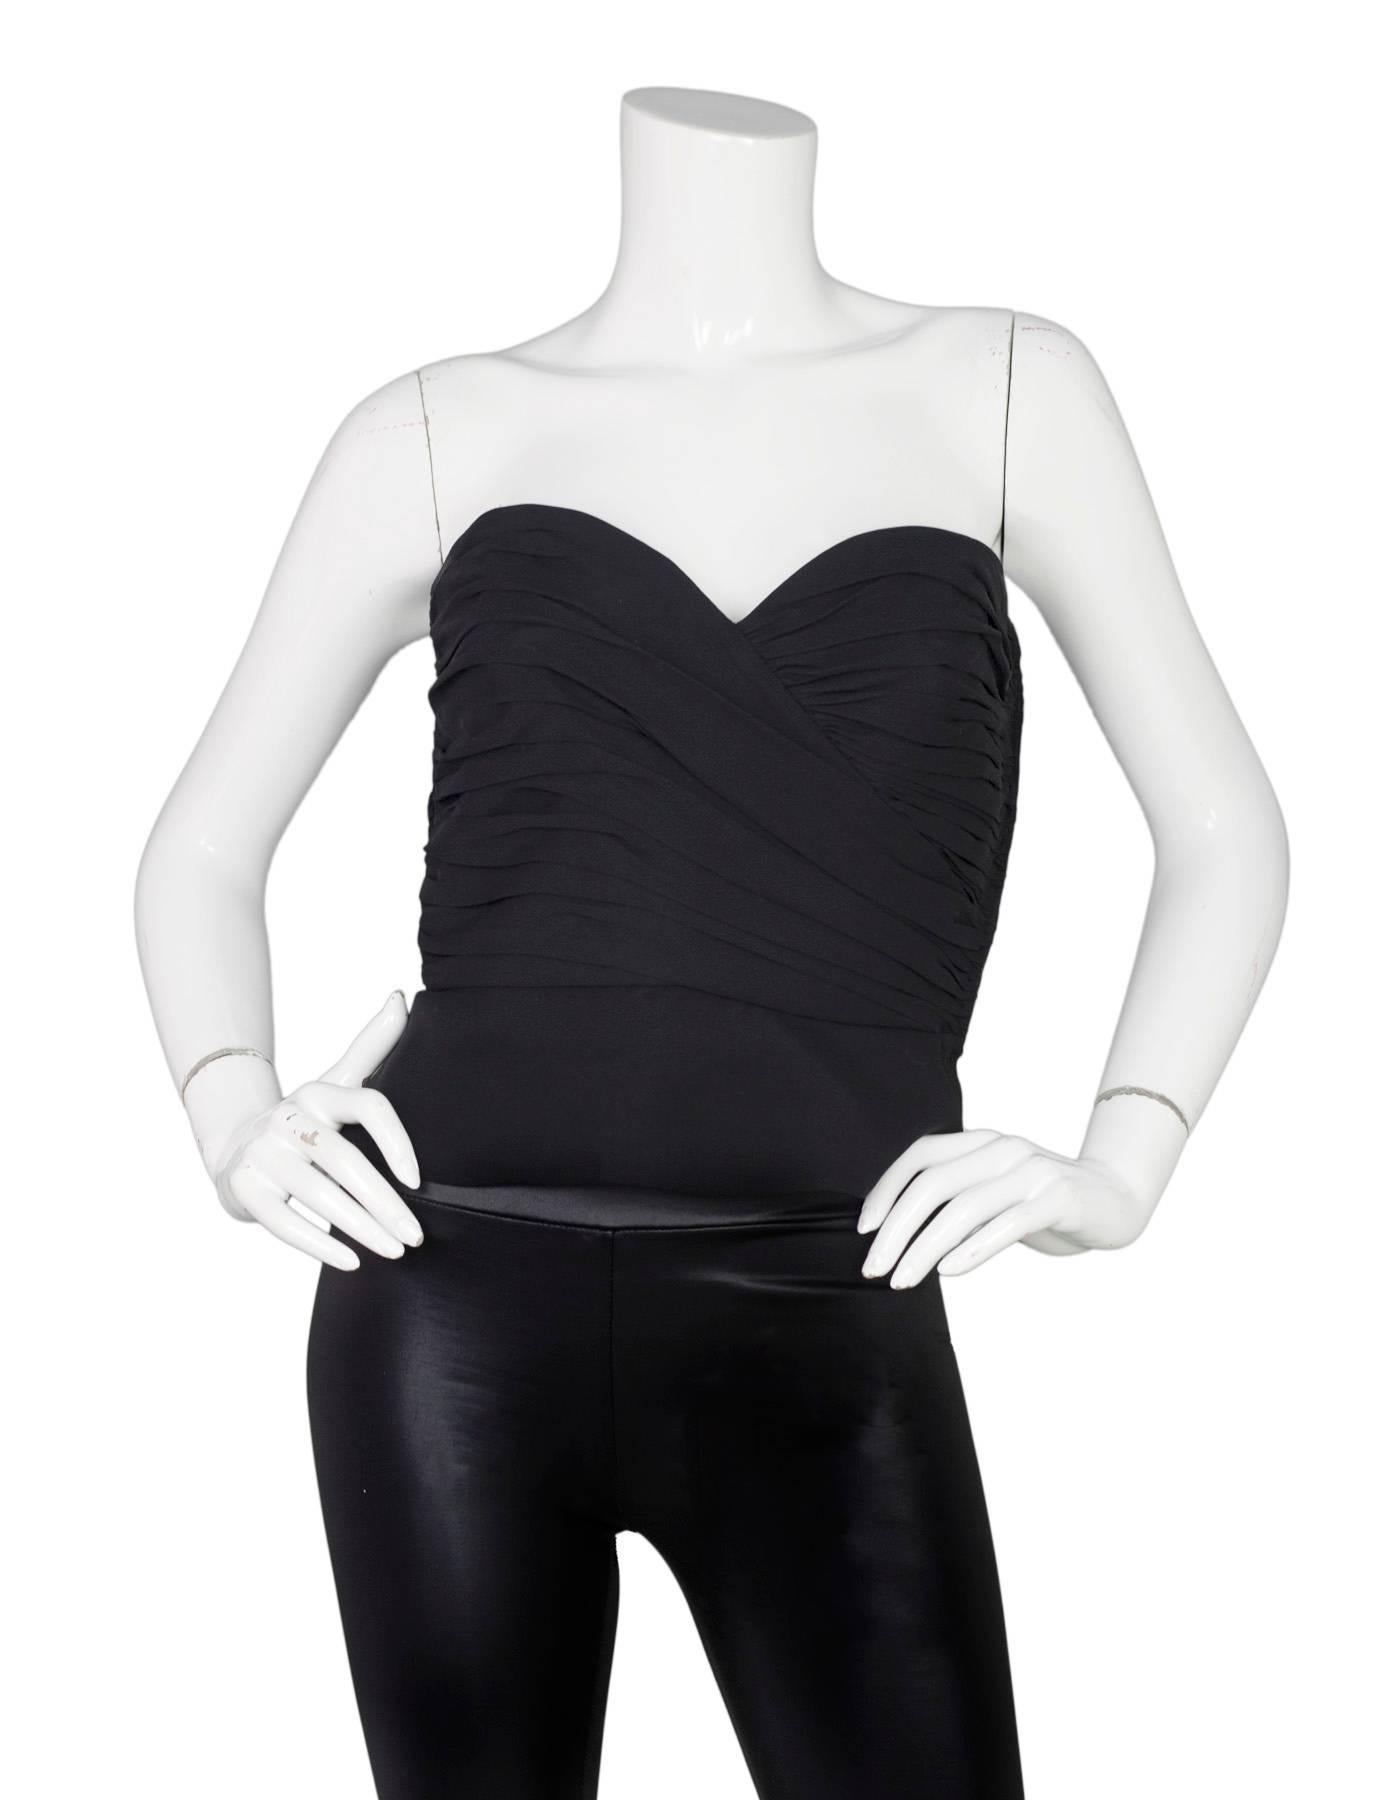 Giorgio Armani Black Silk Bustier
Features light weight silk peplum at hemline

Made In: Italy
Color: Black
Composition: Believed to be 100% silk
Lining: Black, silk blend
Closure/Opening: Side zip up with hook and eye closure
Exterior Pockets: